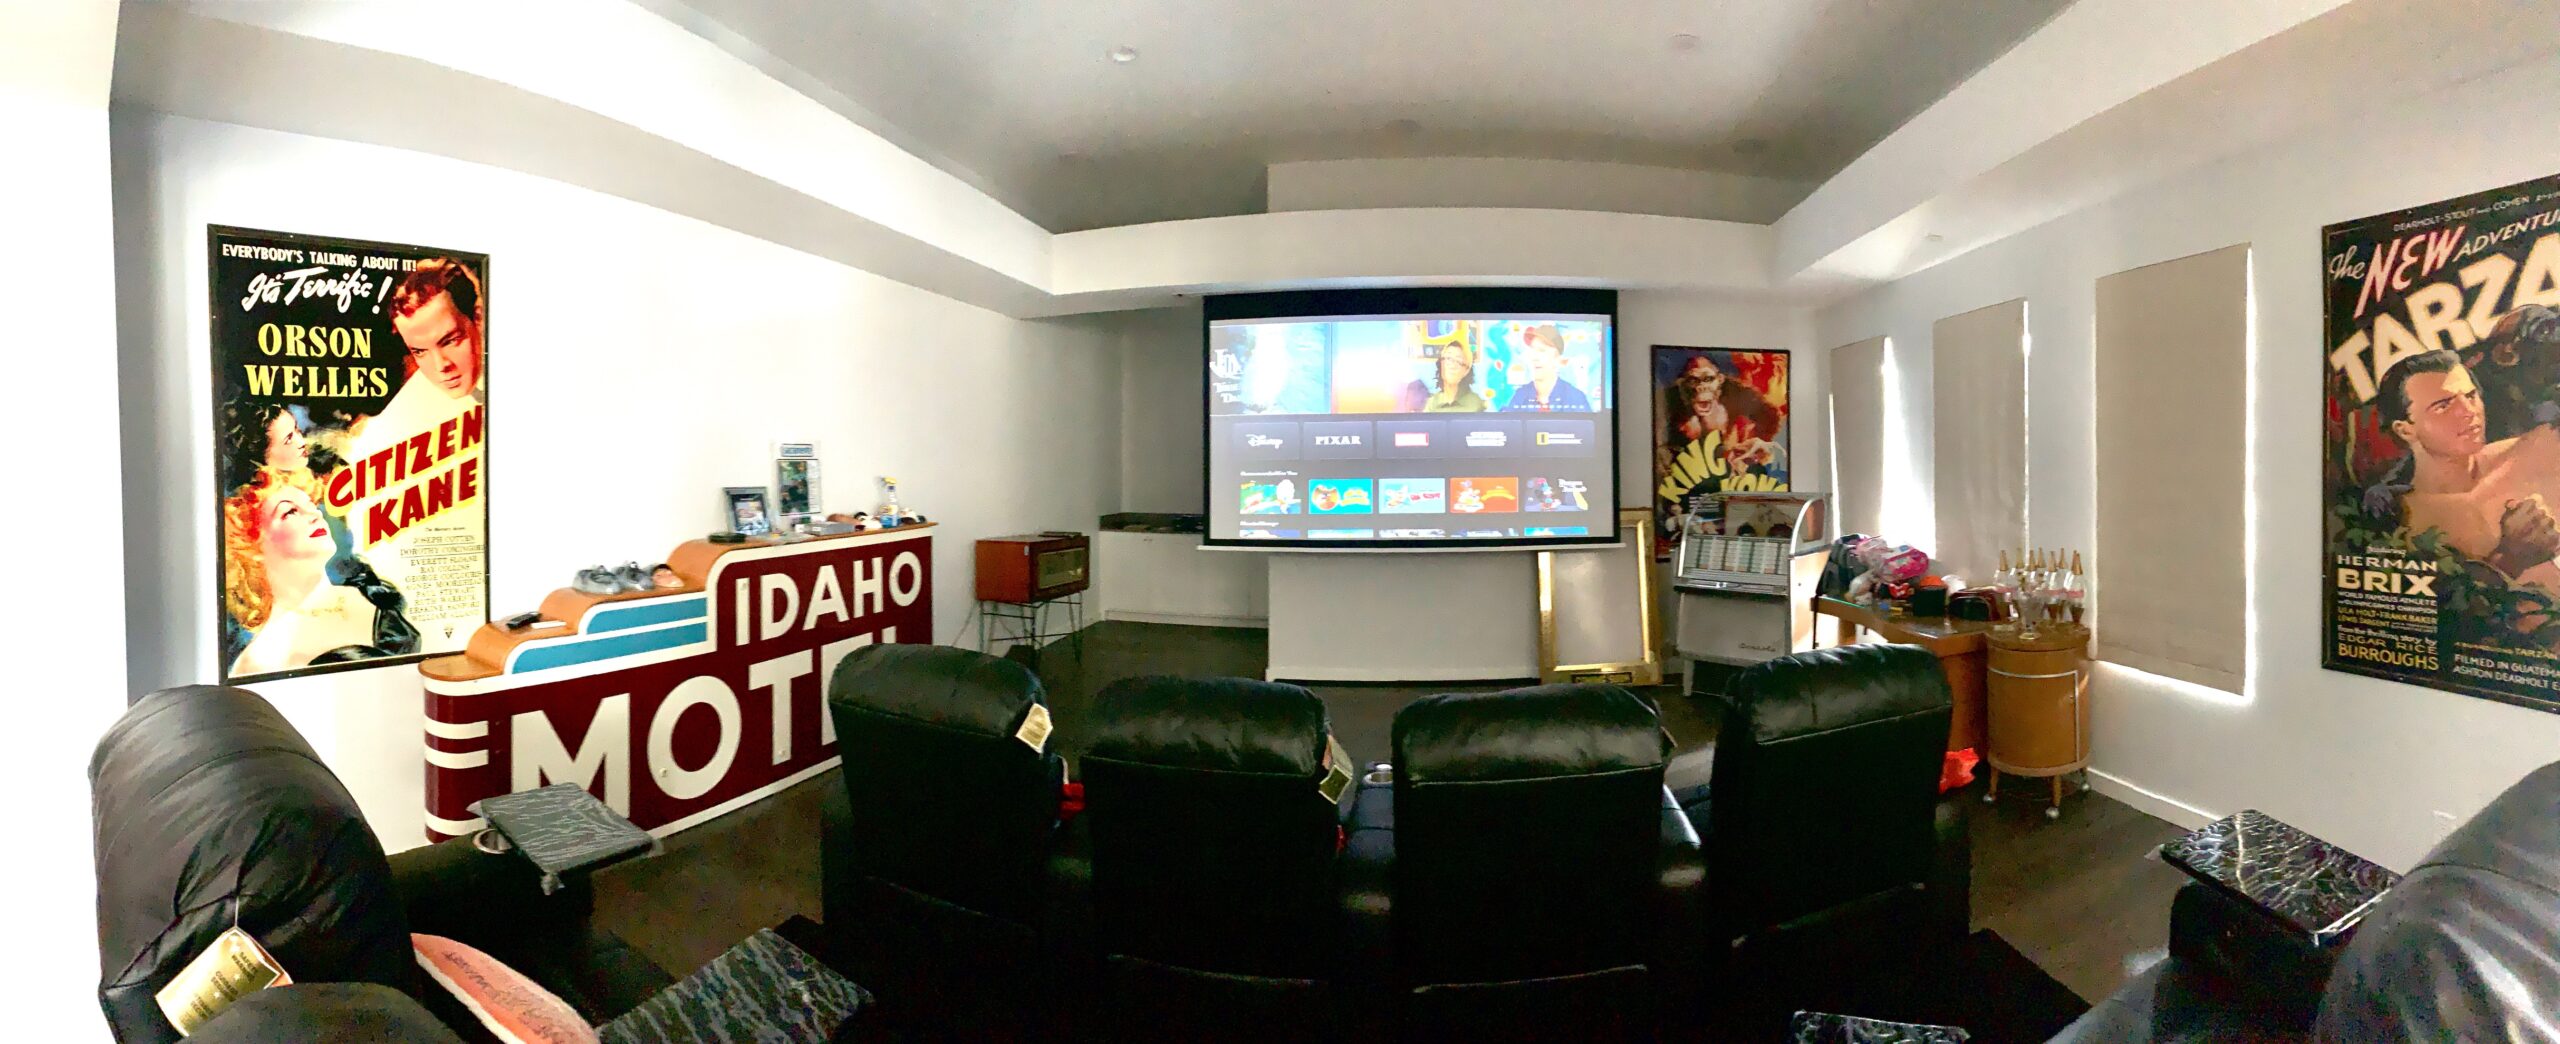 Media room retractable screen, custom leather theater seating and motorized shades